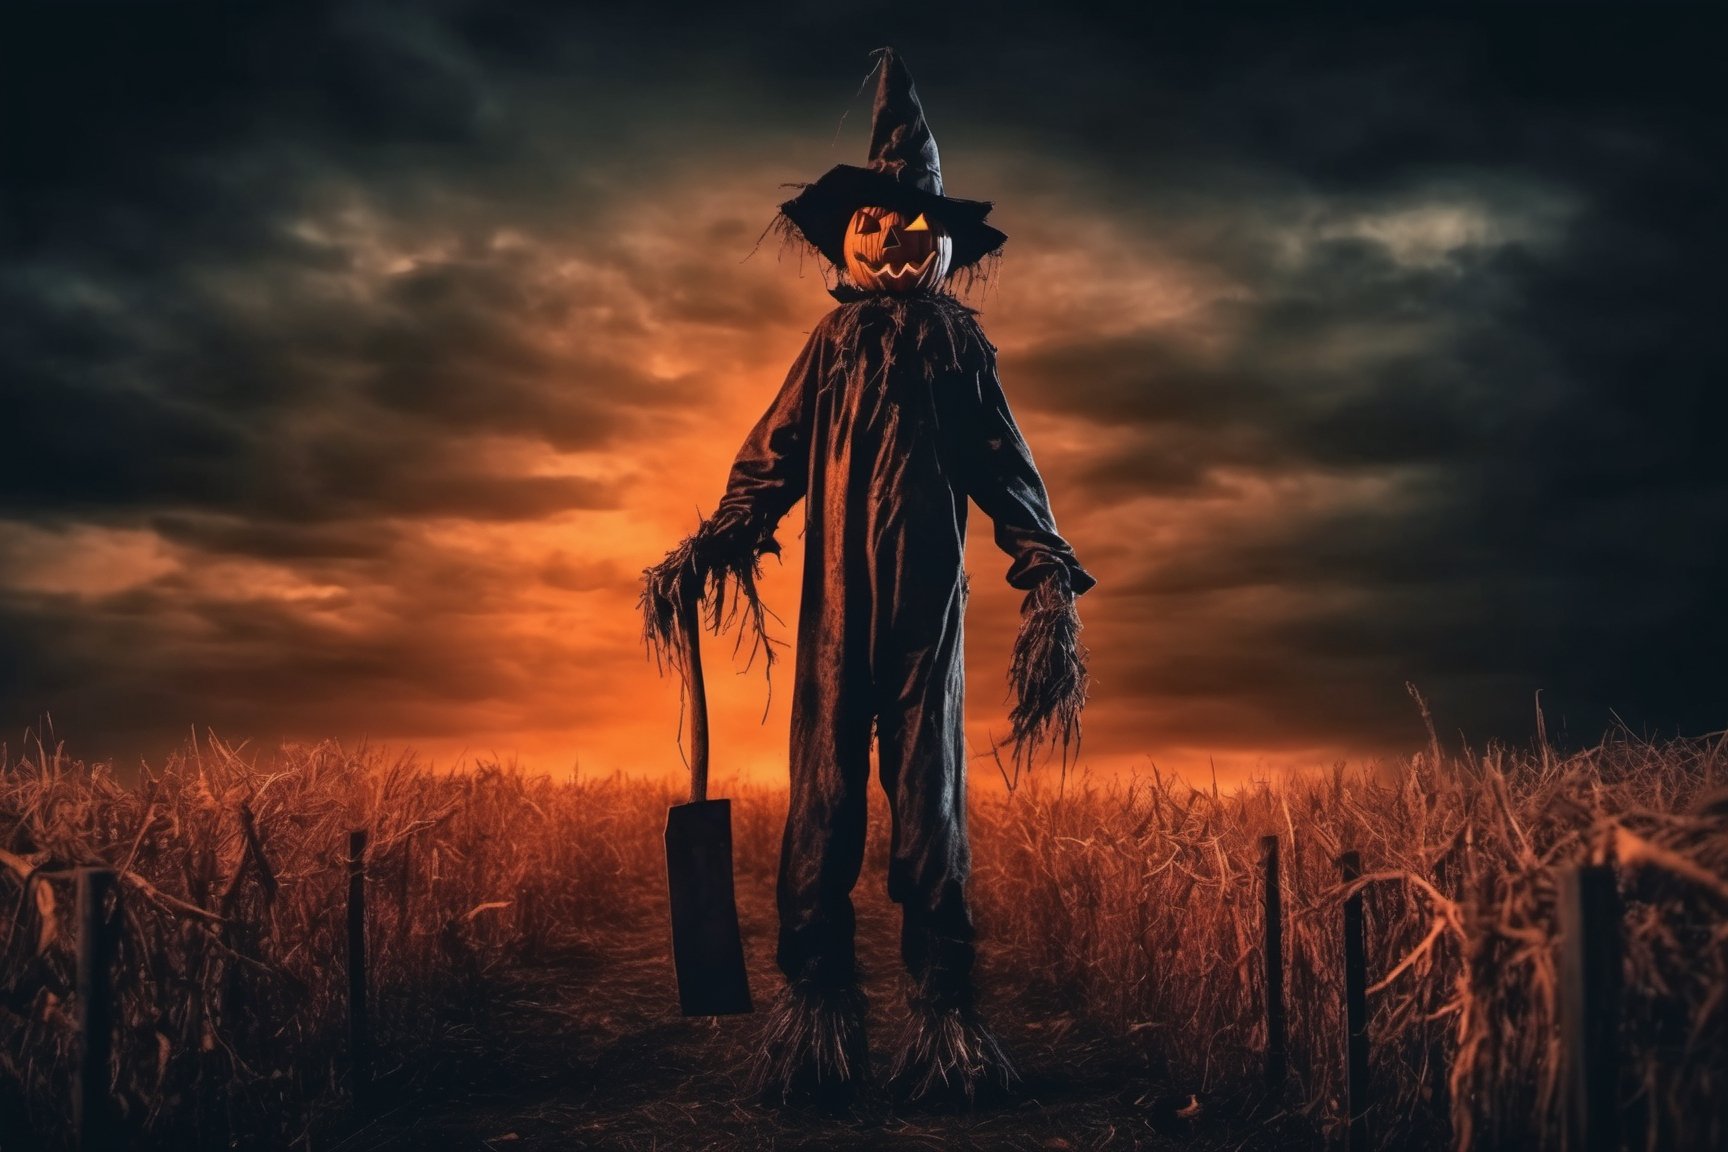 creepy full body scarecrow realistic with hatchet in hand at night foreboding background HD, tenebrism, strange, multi tonal orange and black gradient tumultuous sky, dark core, moderately controlled chaos, ghost core, Nicolas Samori